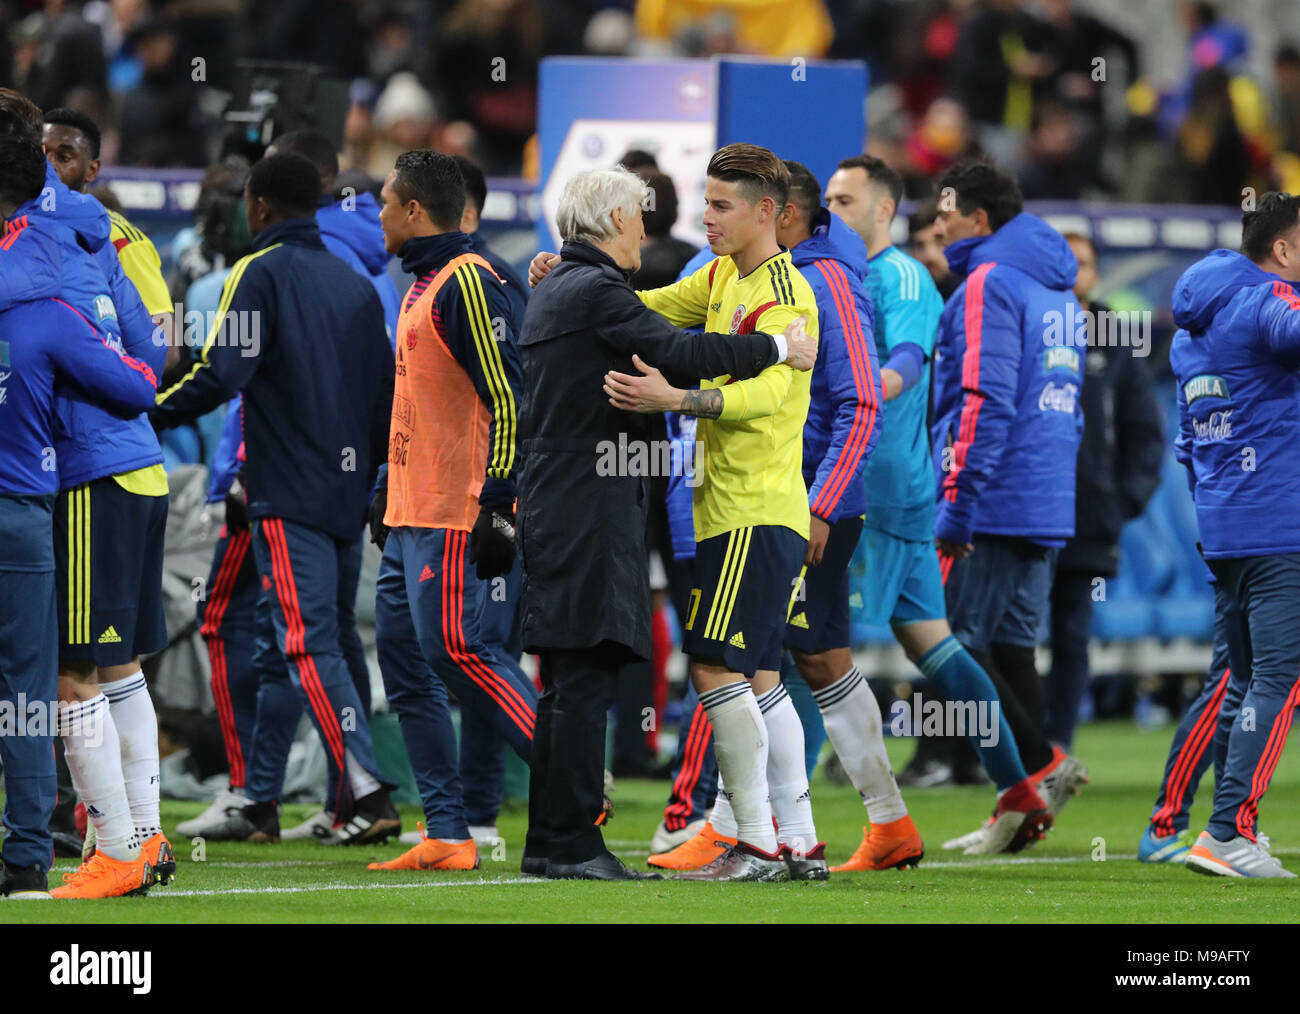 Jose Pekerman, James Rodriguez (COL), MARCH 23, 2018 - Football / Soccer : International friendly match between France 2-3 Colombia at Stade de France in Saint-Denis, France, (Photo by AFLO) Stock Photo